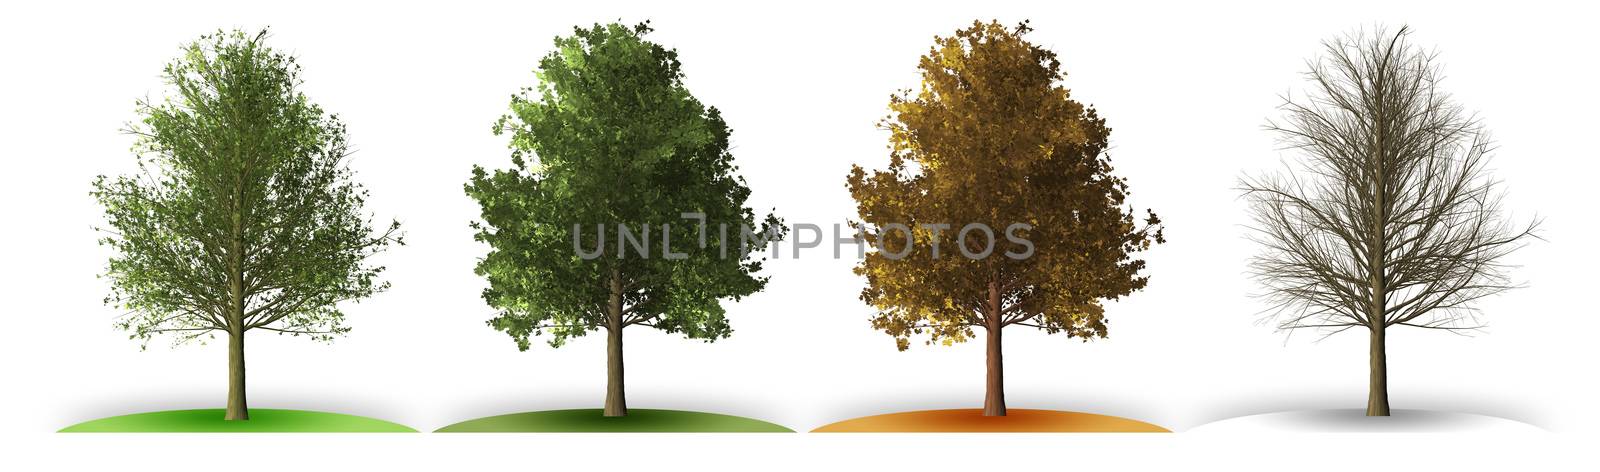 An illustration of a tree in four seasons